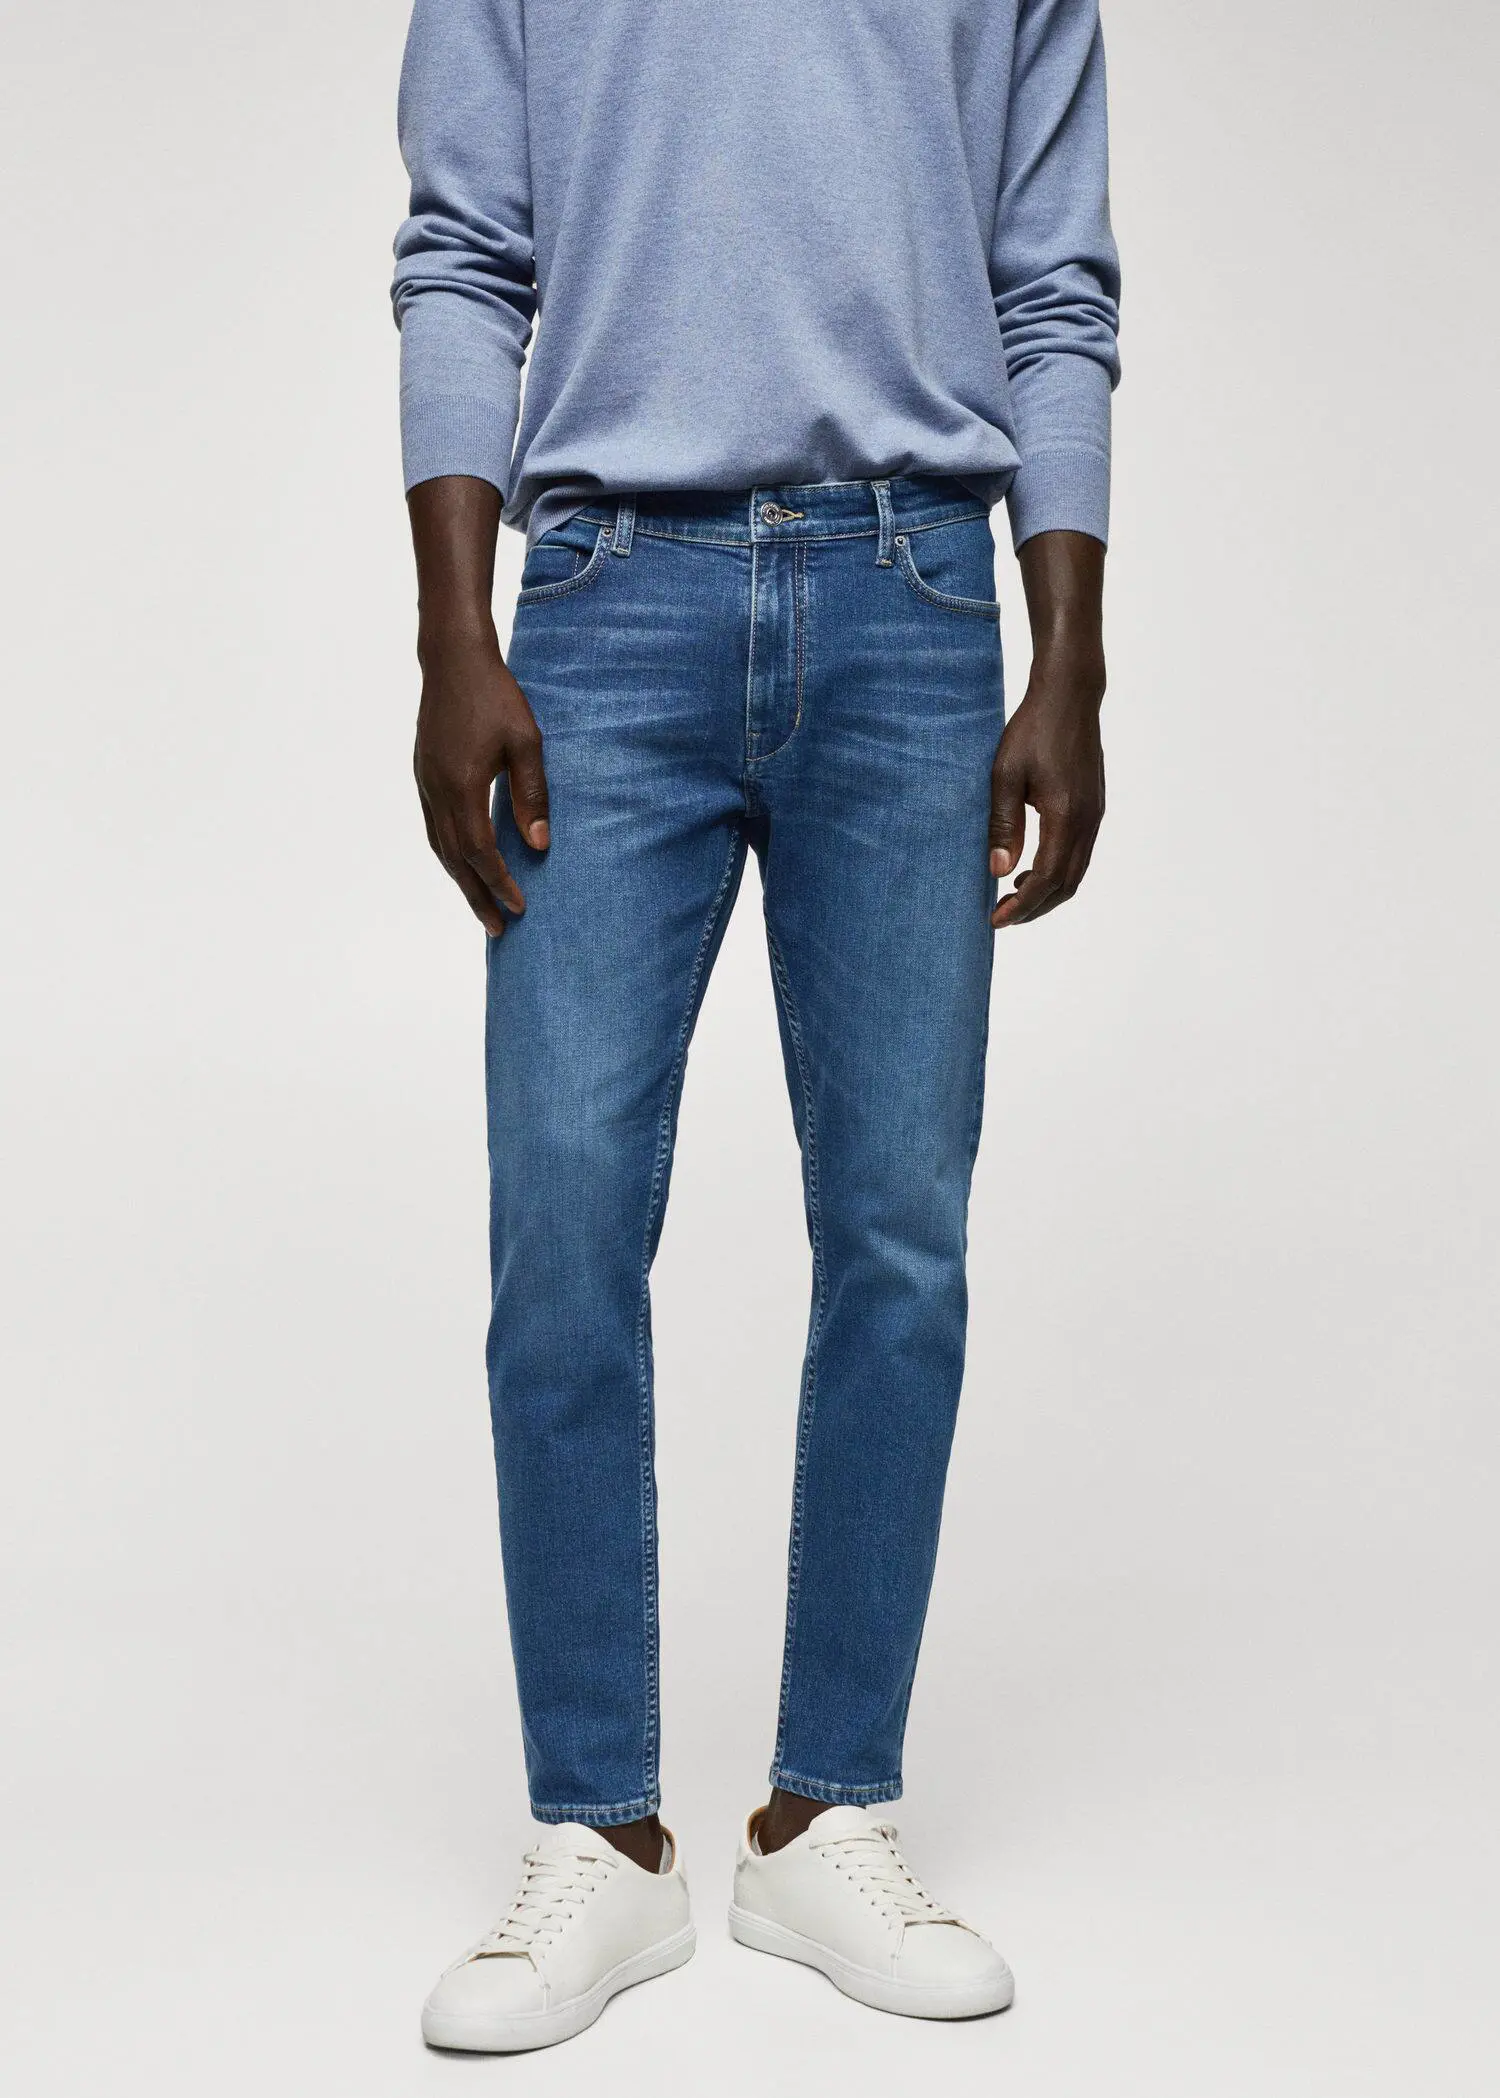 Mango Tom tapered cropped jean. 2